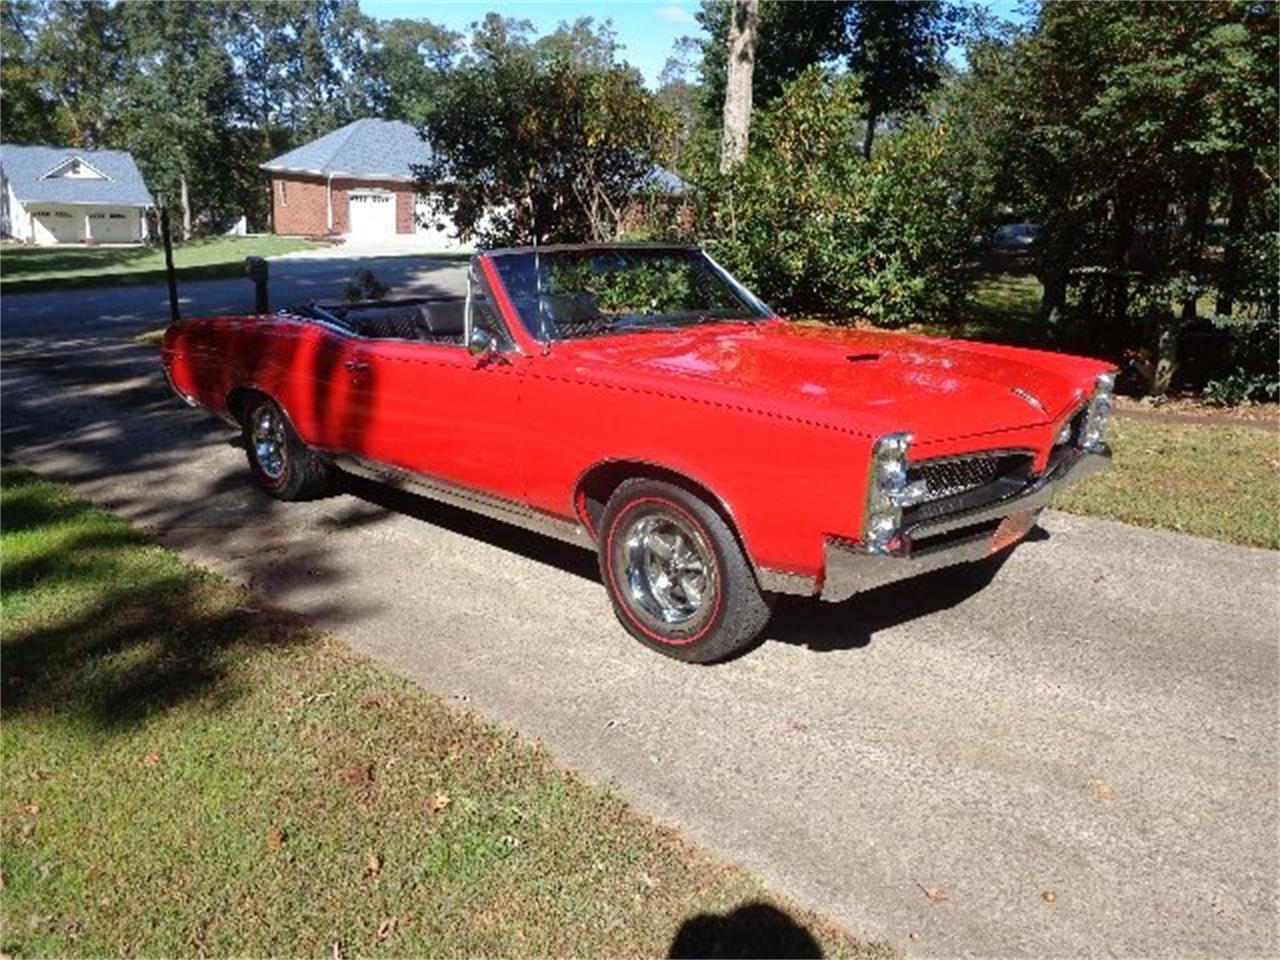 For Sale at Auction: 1967 Pontiac GTO in Greensboro, North Carolina for sale in Greensboro, NC